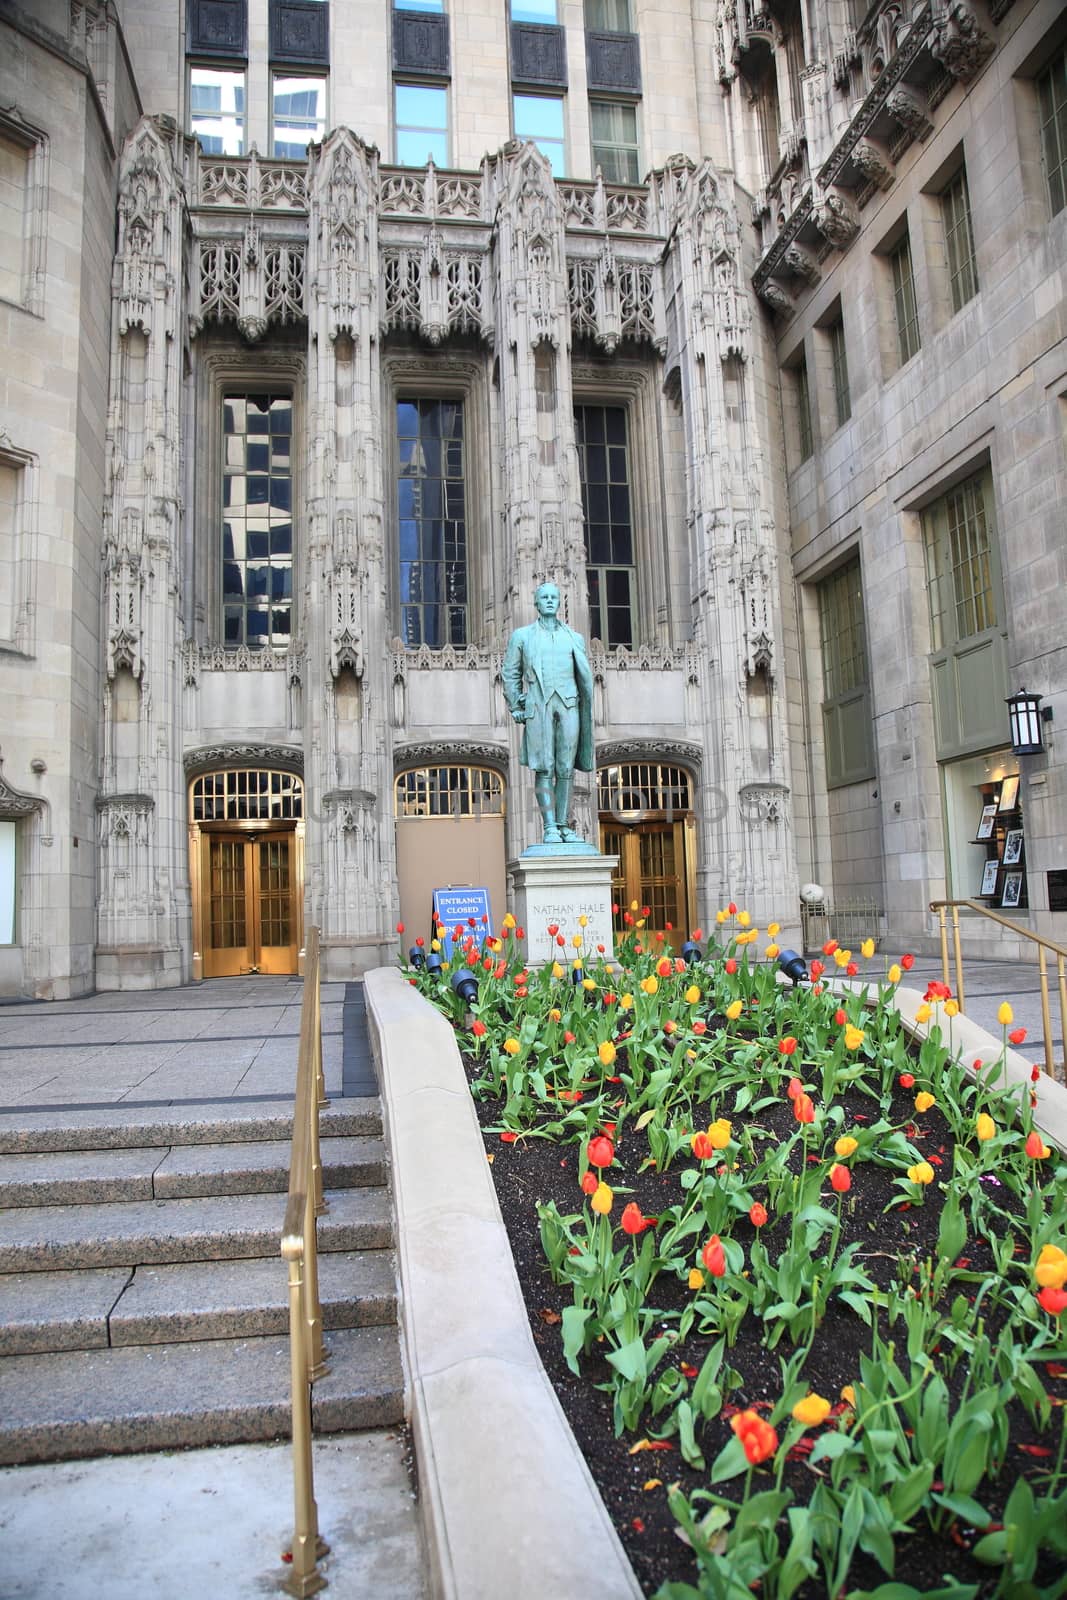 Nathan Hale Statue - Tribune Tower by Ffooter